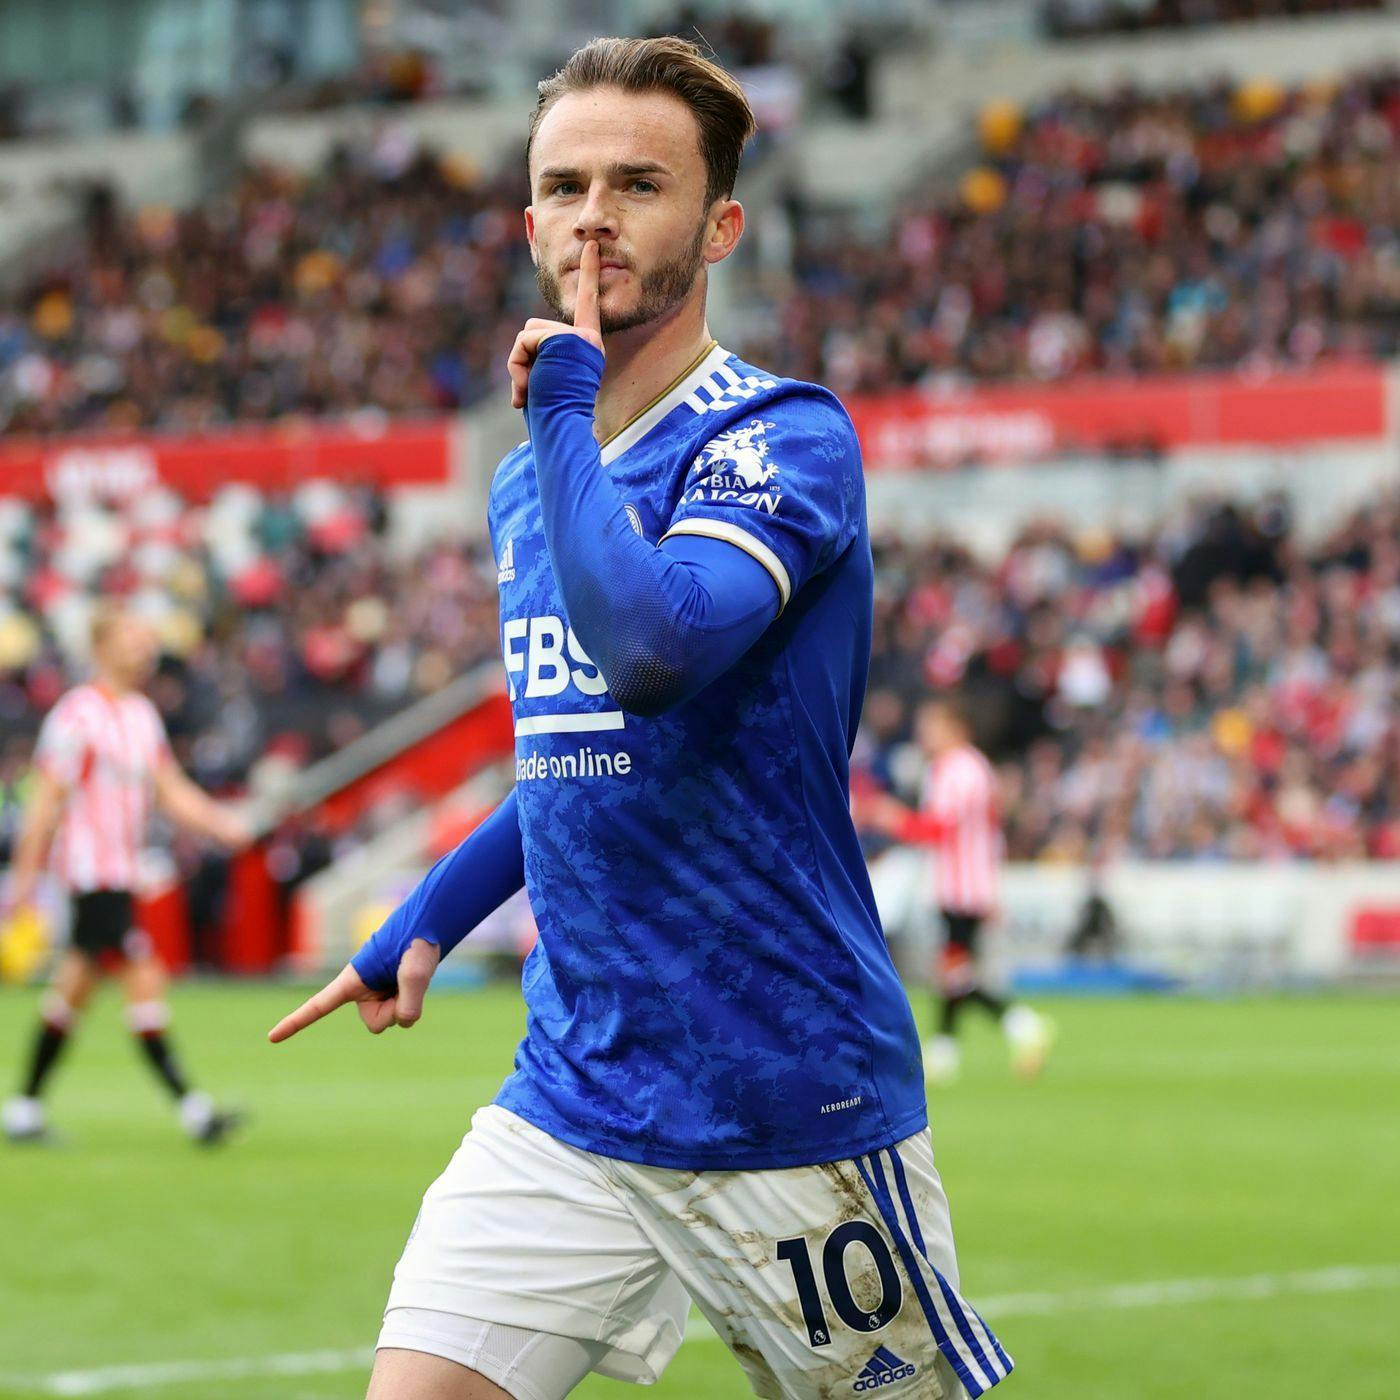 Behind Enemy Lines: Arsenal verdict on James Maddison set to be delivered as Gunners head to the King Power